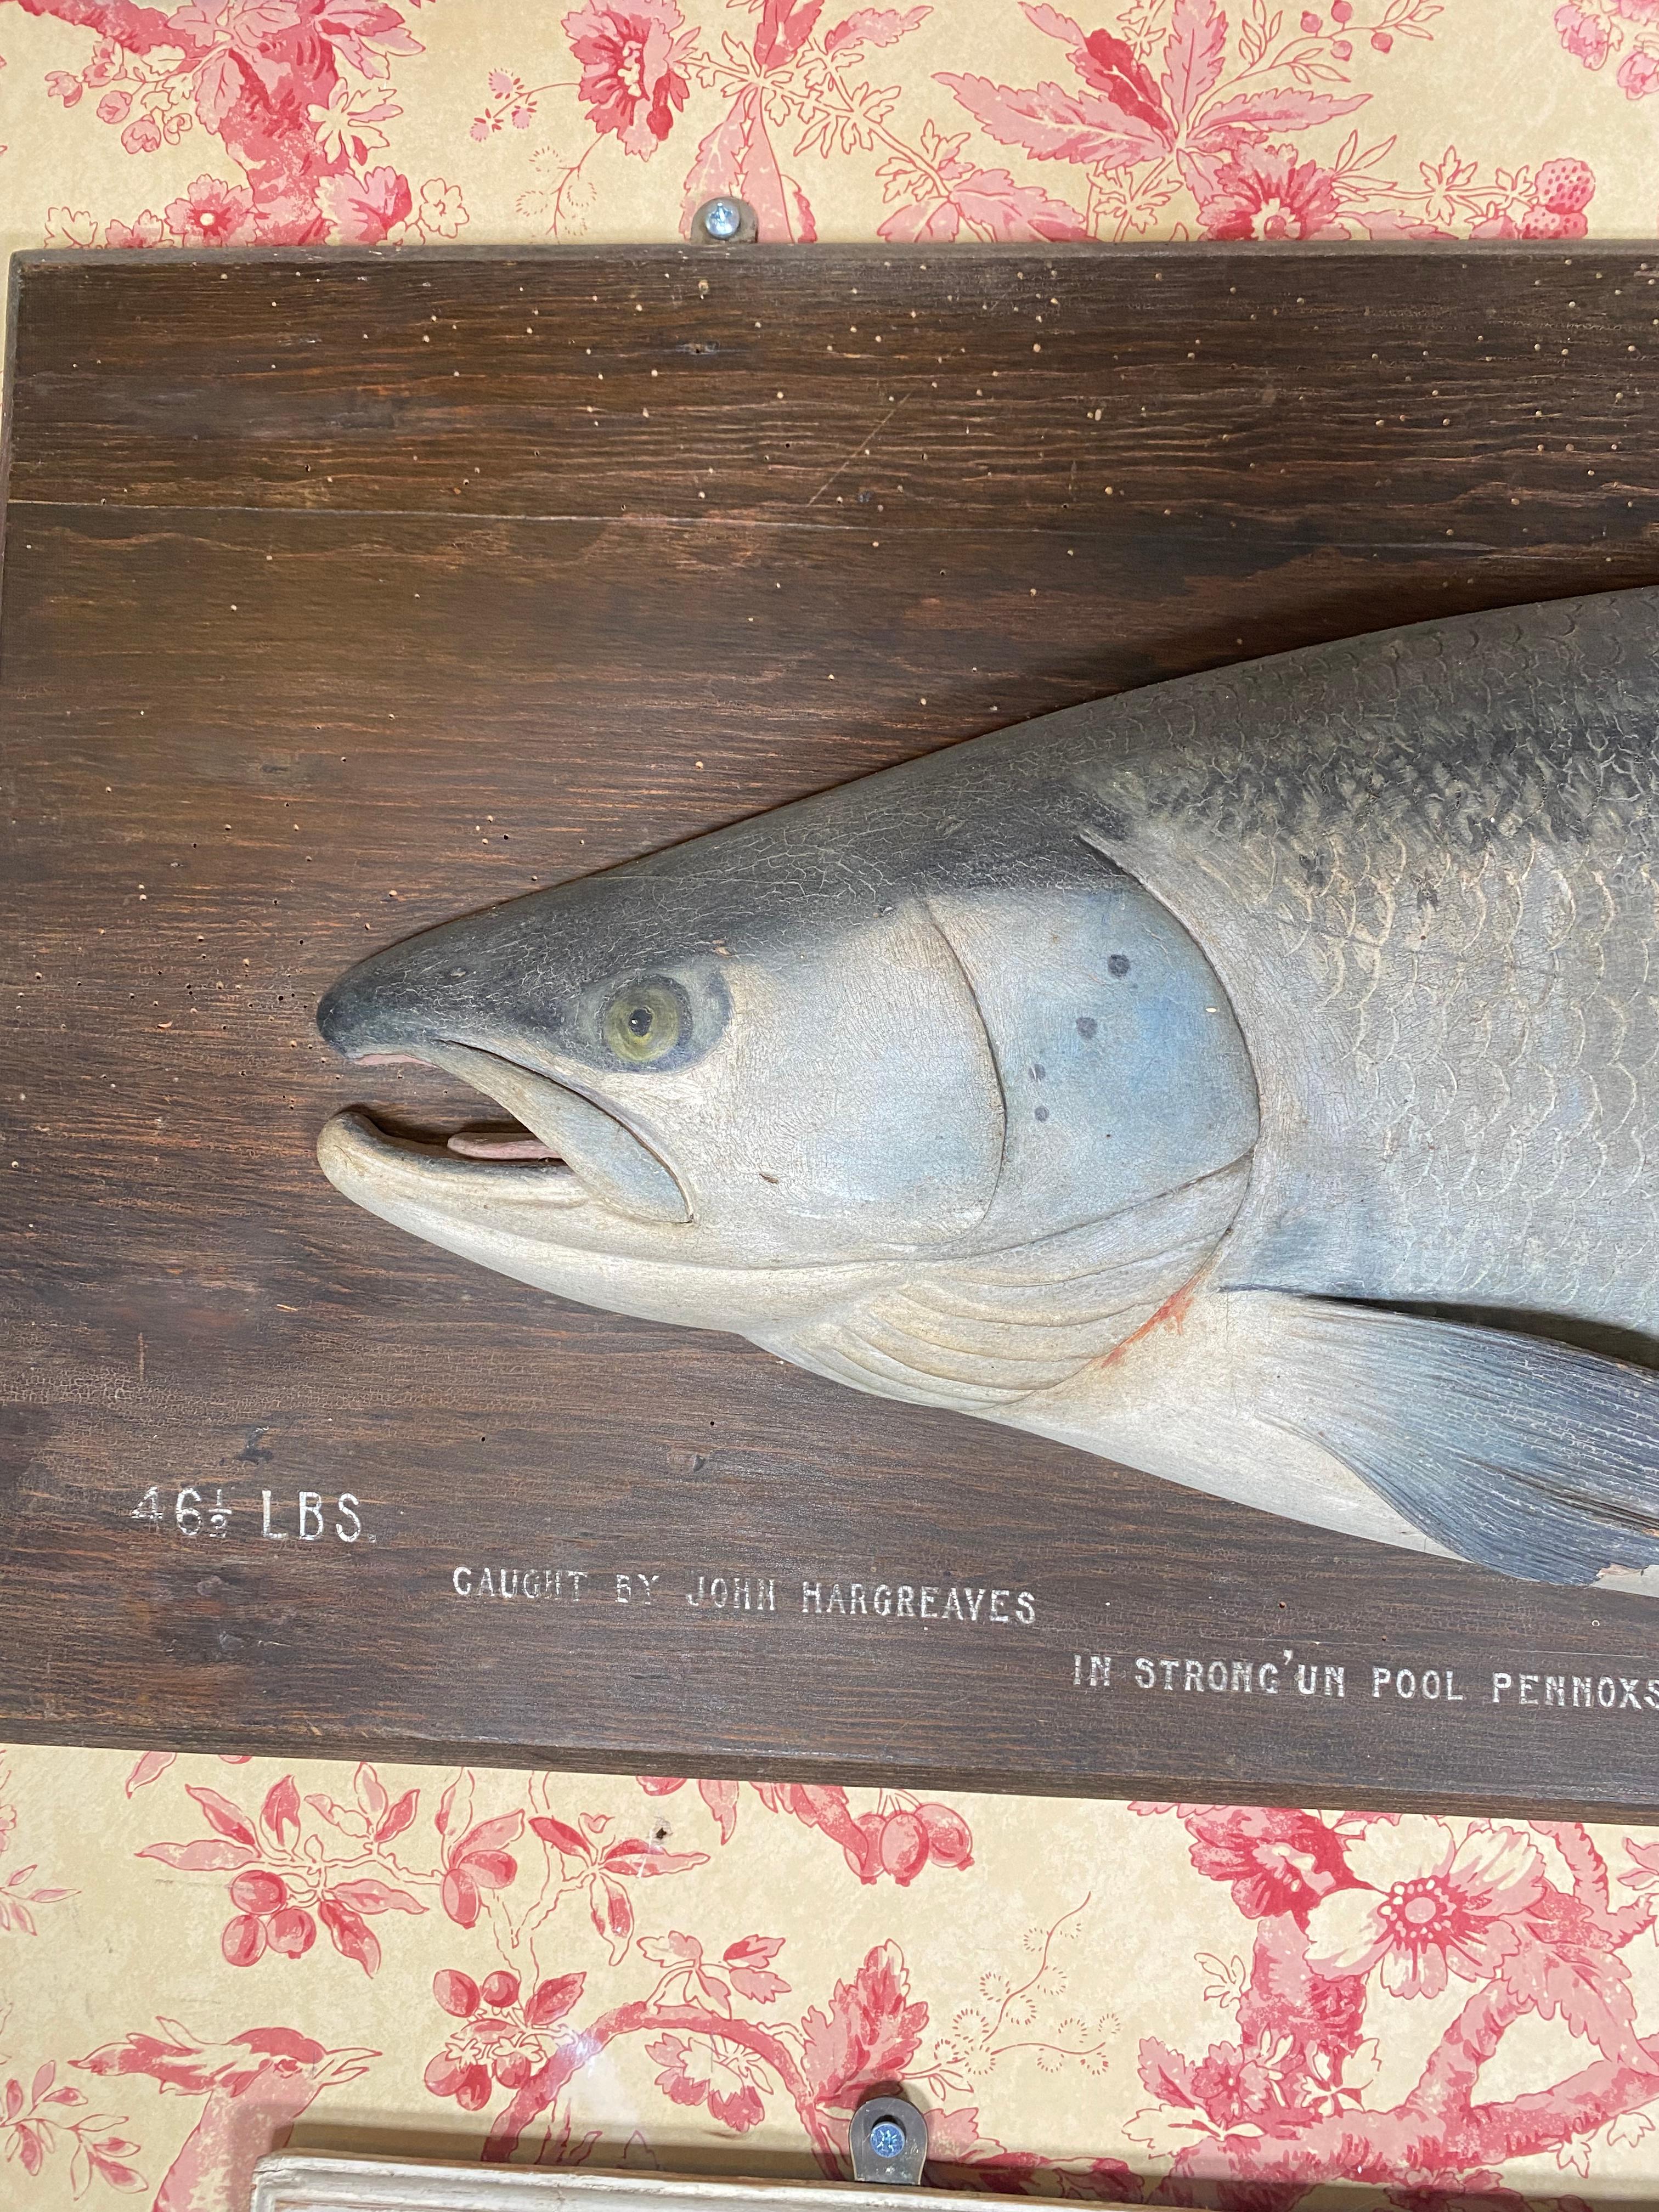 A RARE AND OUTSTANDING CARVED ATLANTIC SALMON from the Fochabers Studio.
Carved by John Tully and painted by his wife Dhuie, Daughter of John Russell, a famous wildlife artist. John was the carpenter for the Duke of Richmond and Gordon at Fochabers